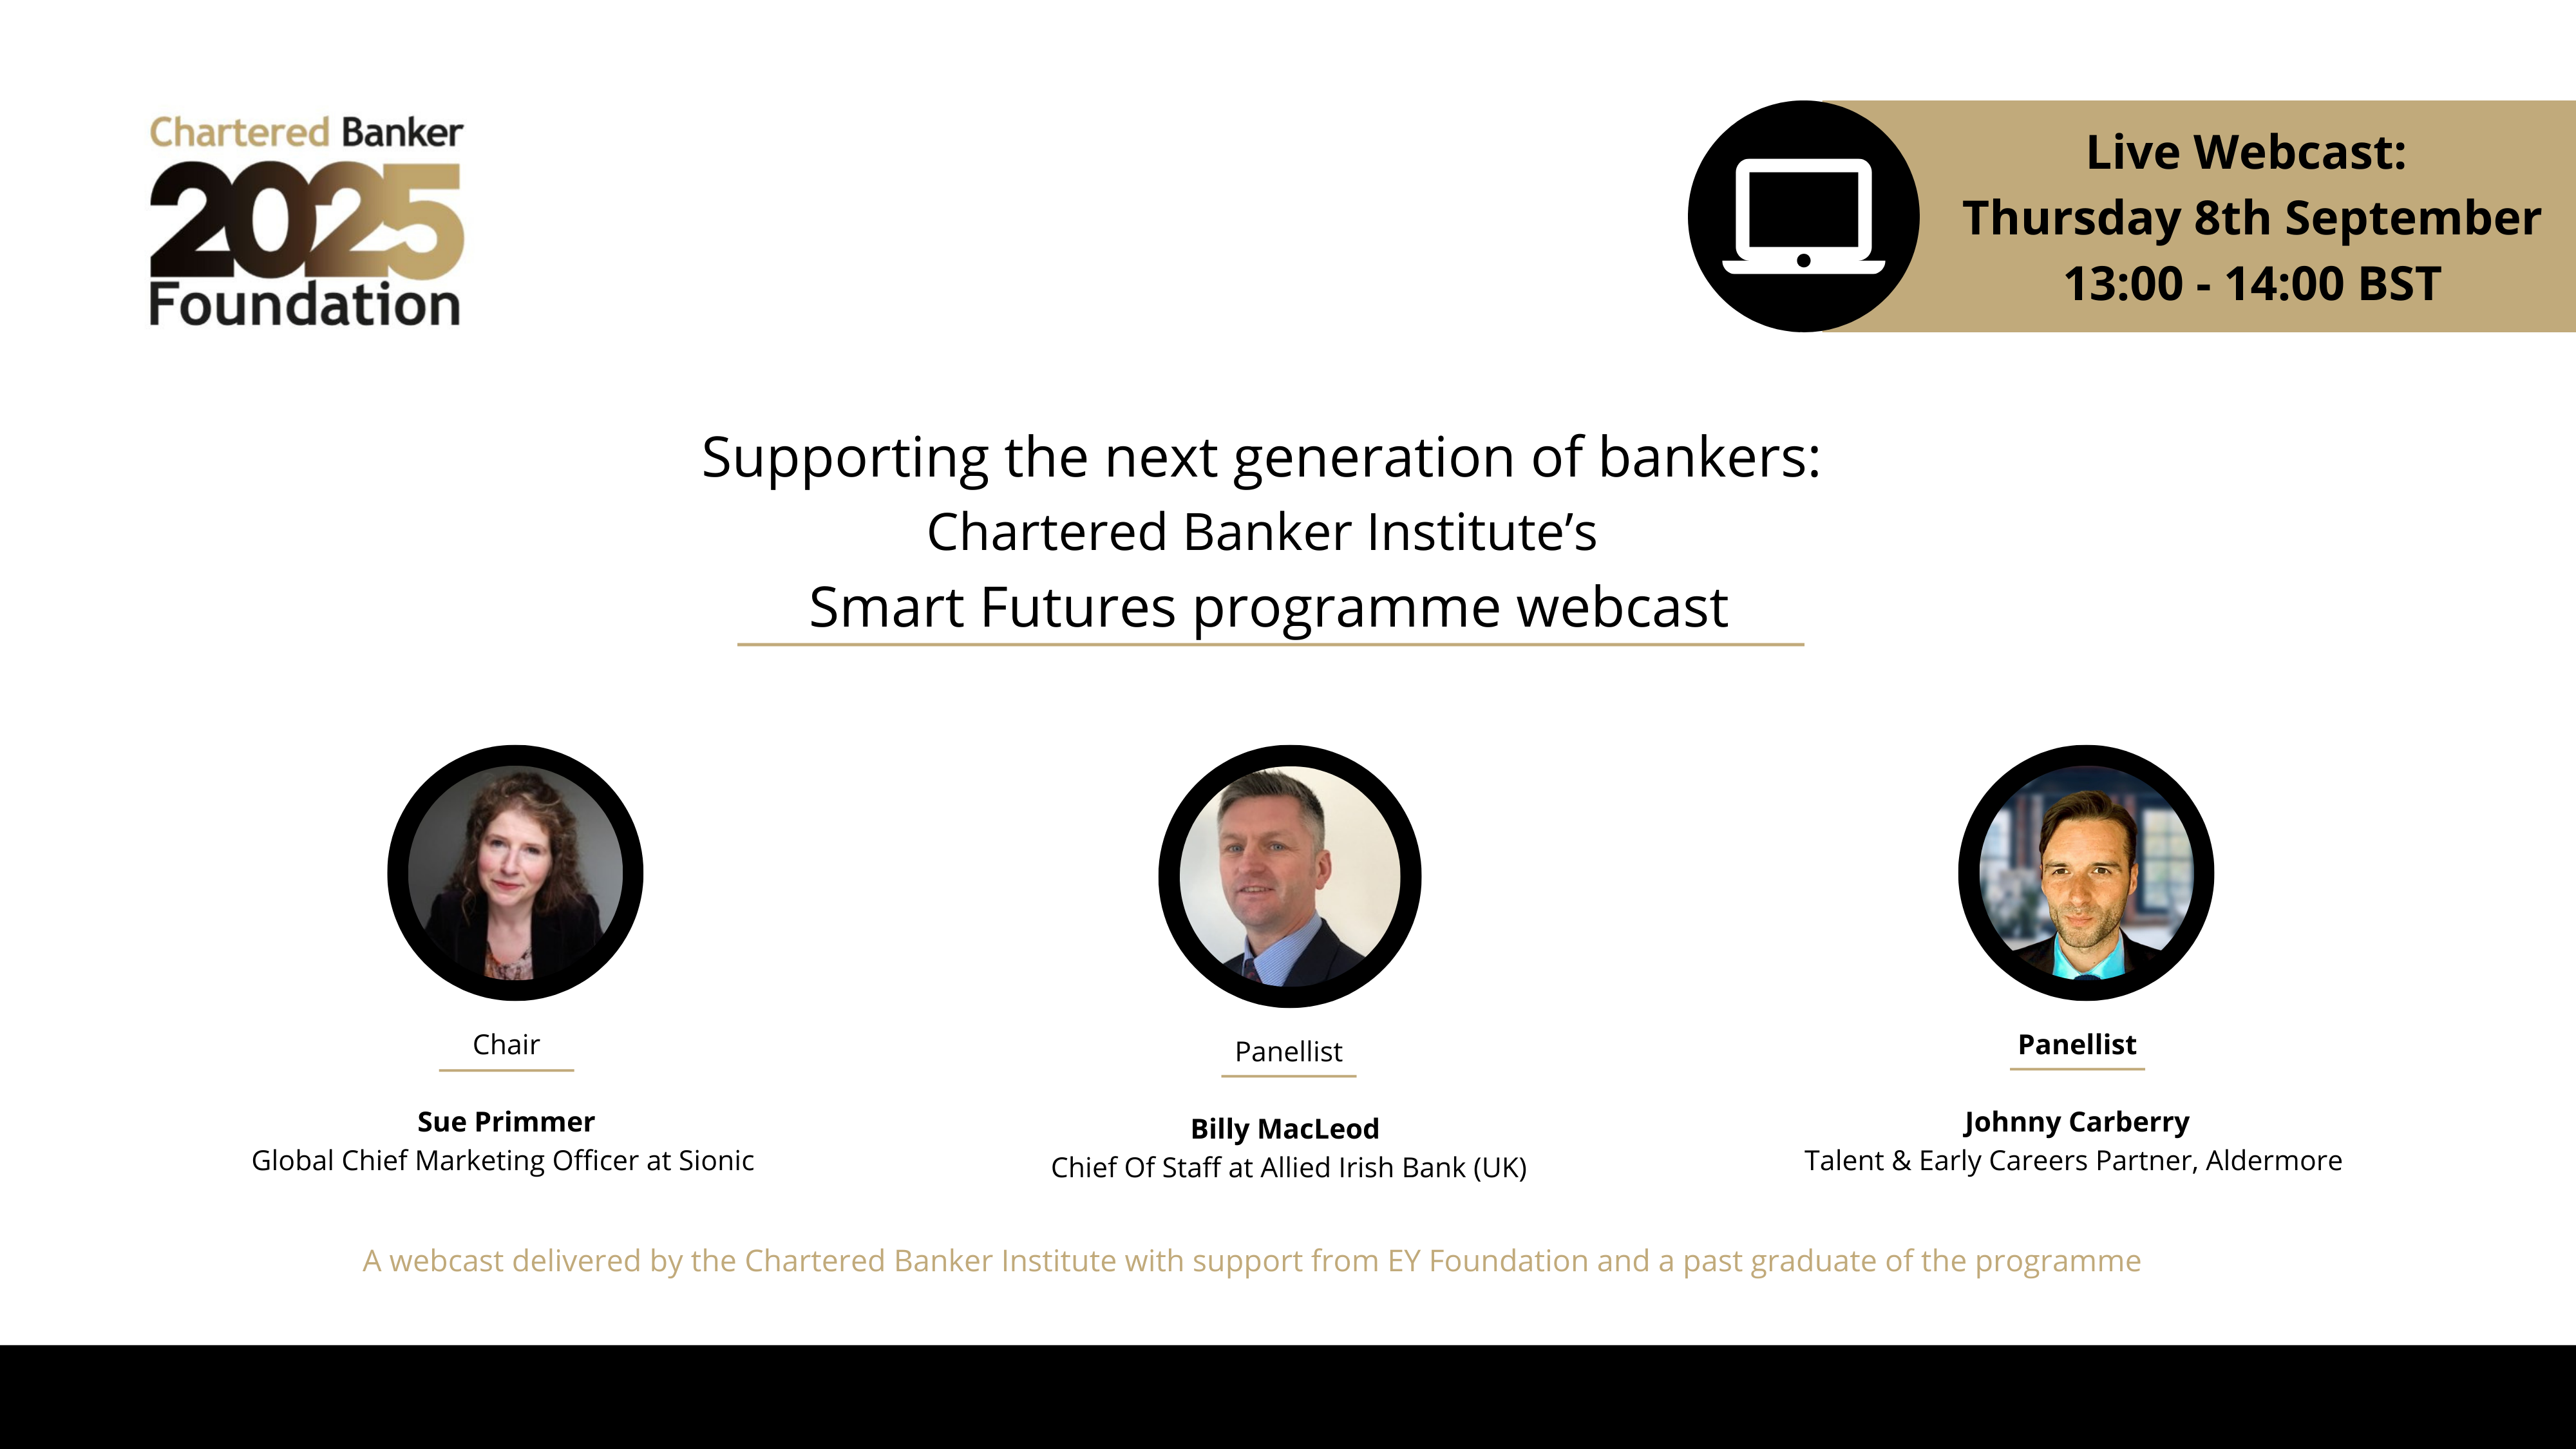 Supporting the next generation of bankers: Smart Futures programme